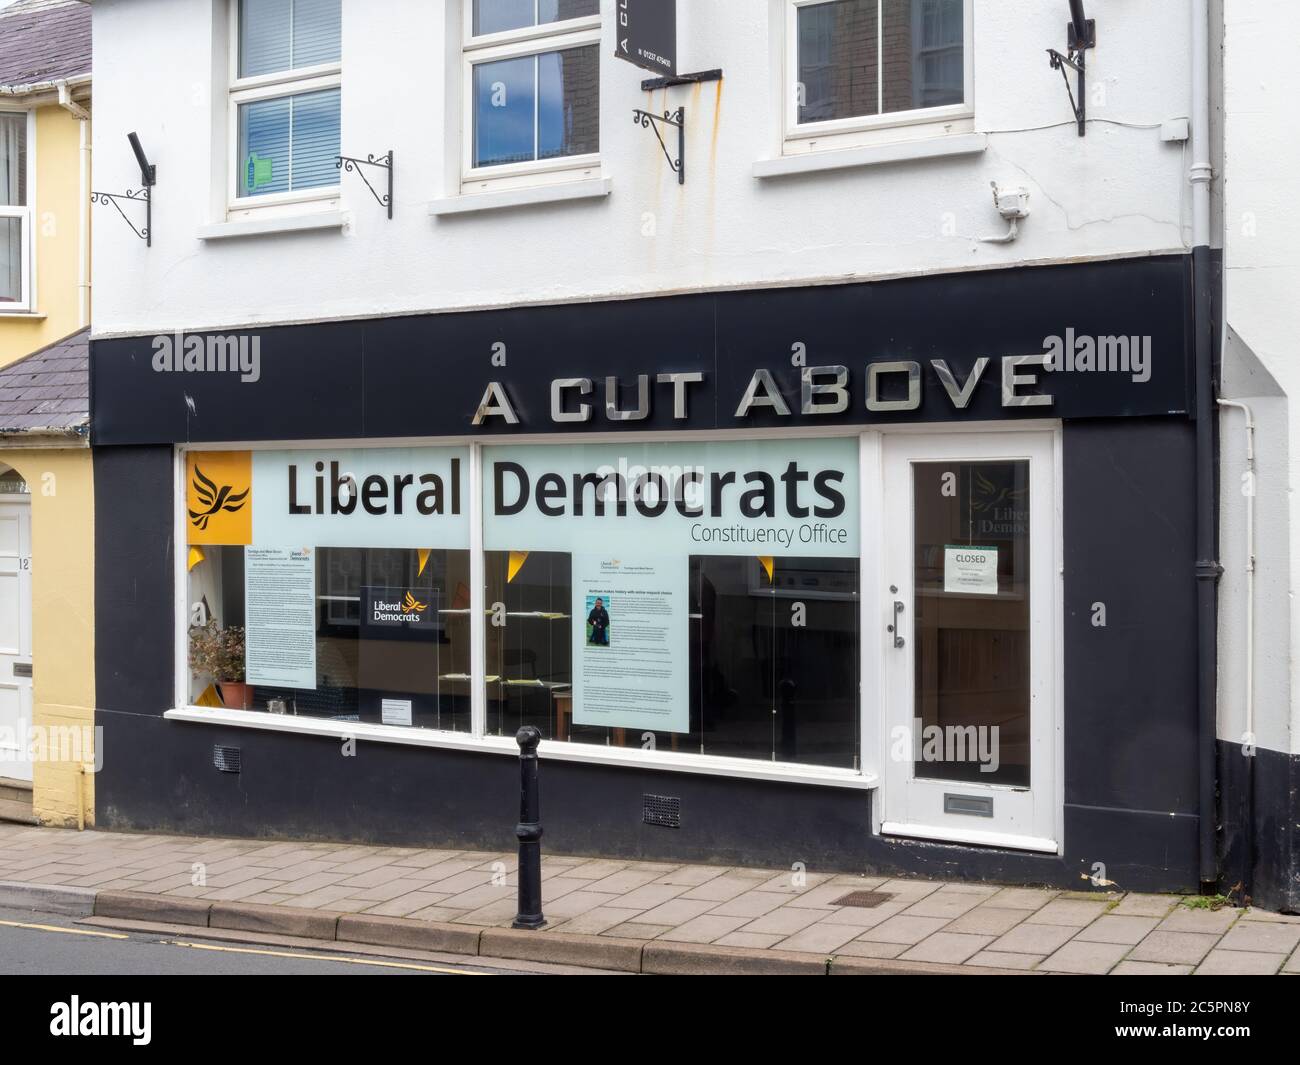 BIDEFORD, DEVON, UK - JULY 01 2020: Liberal Democrats' office, with hairdressers above. Stock Photo